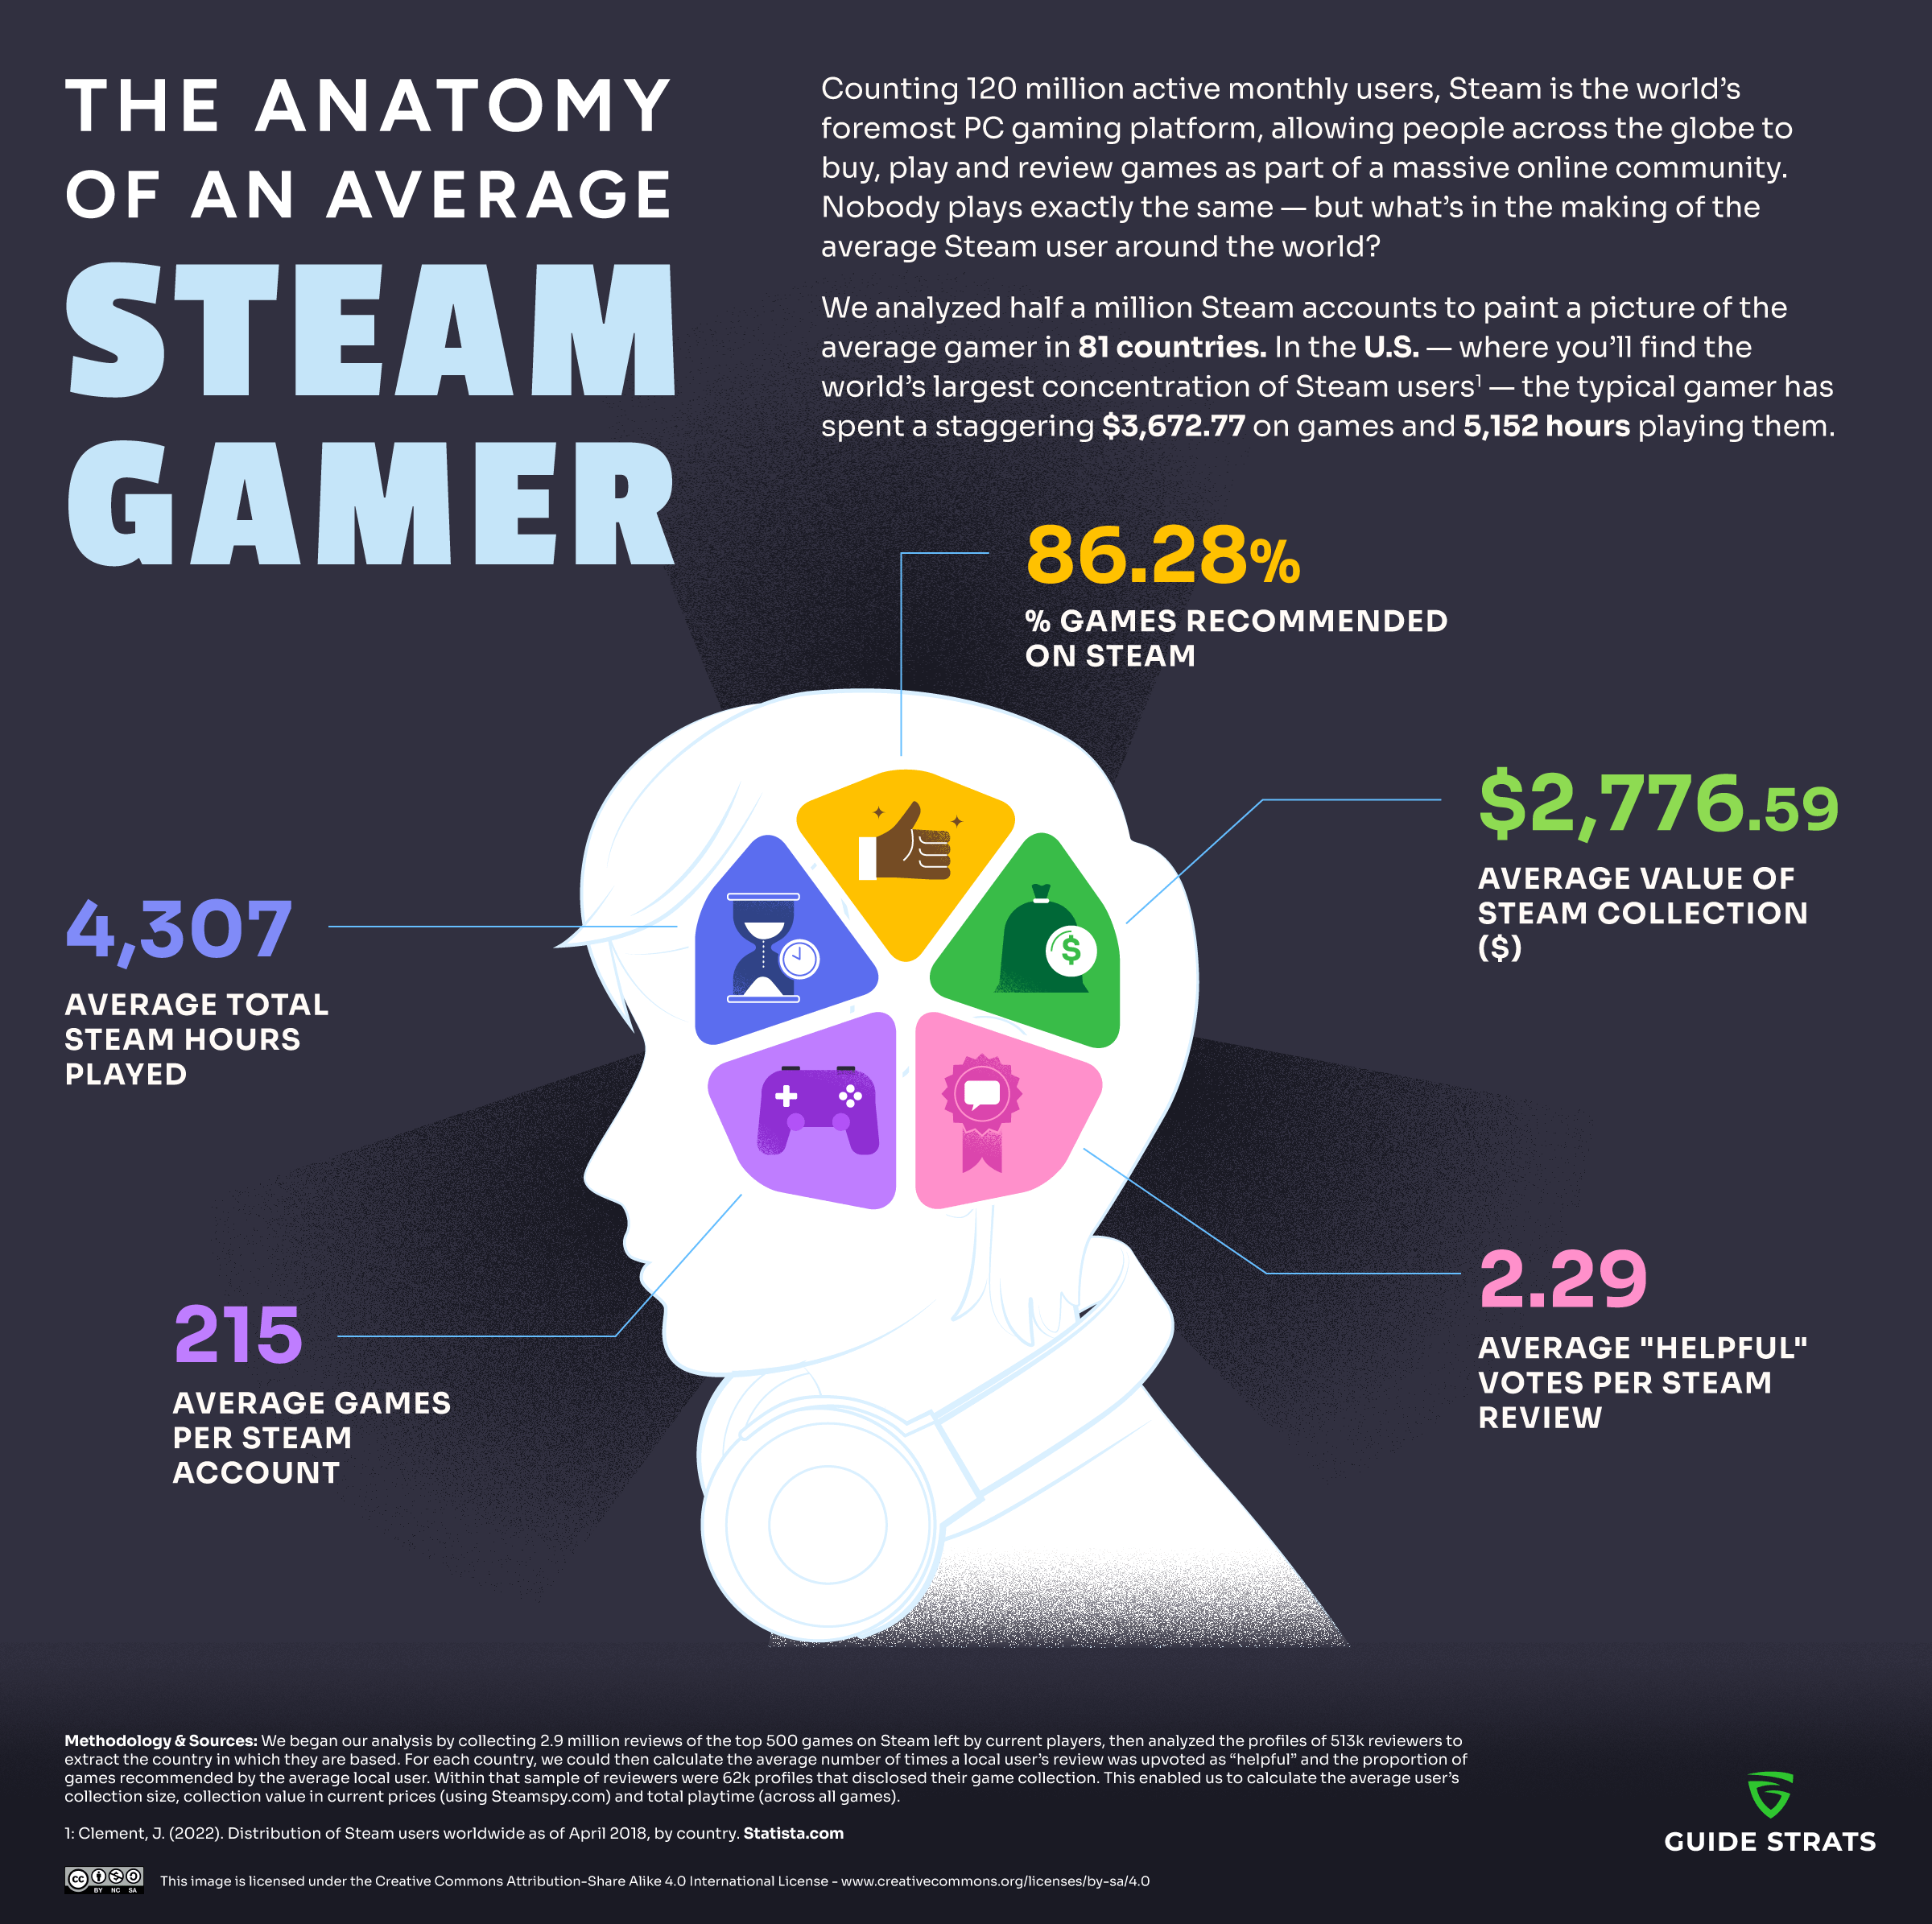 The Anatomy of an Average Steam Gamer (Infographic)